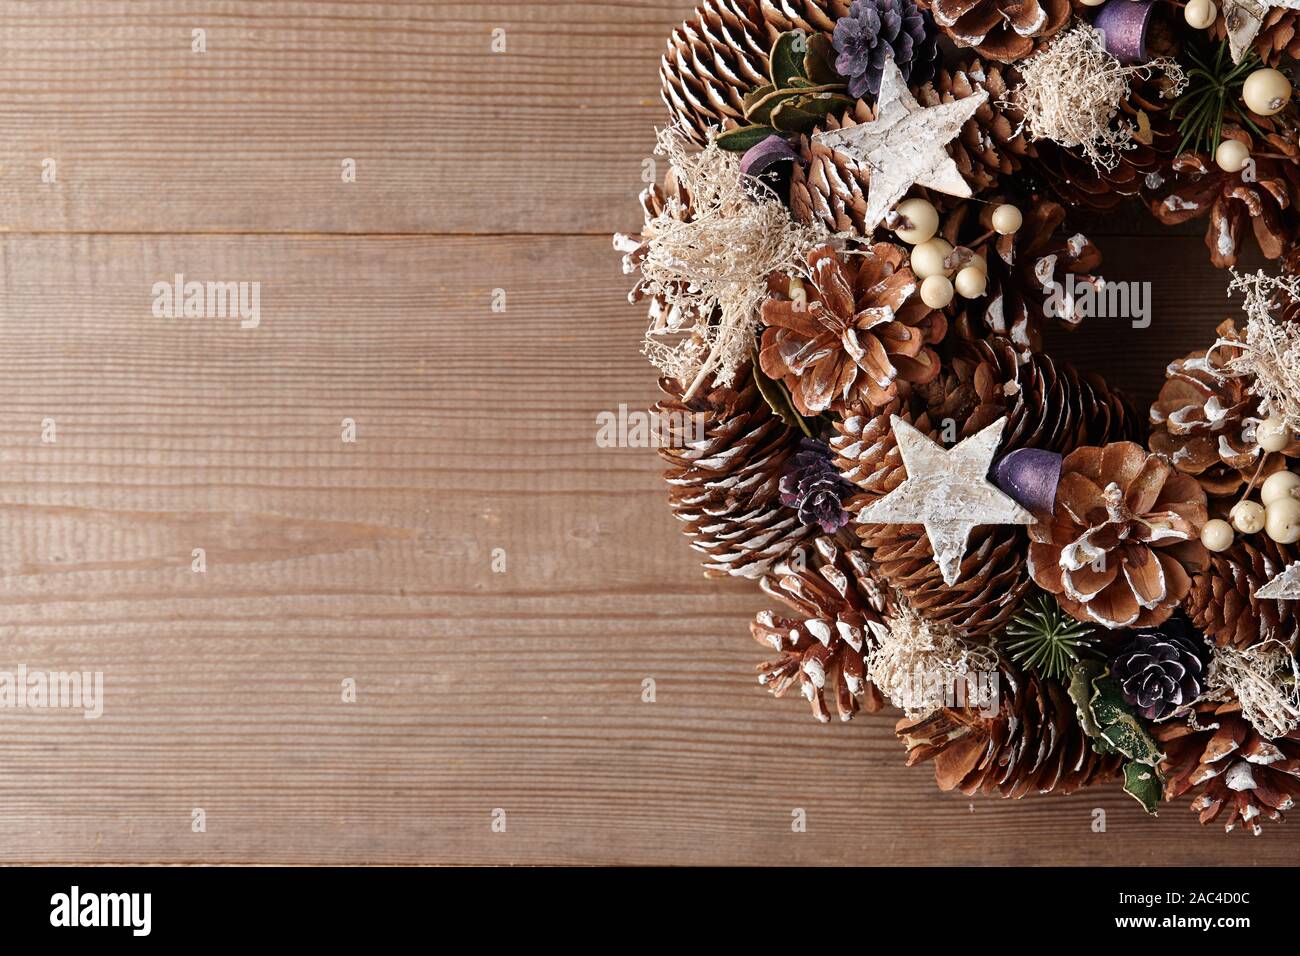 Christmas wreath decorated with pine and fir tree cones on wooden door, close up view Stock Photo